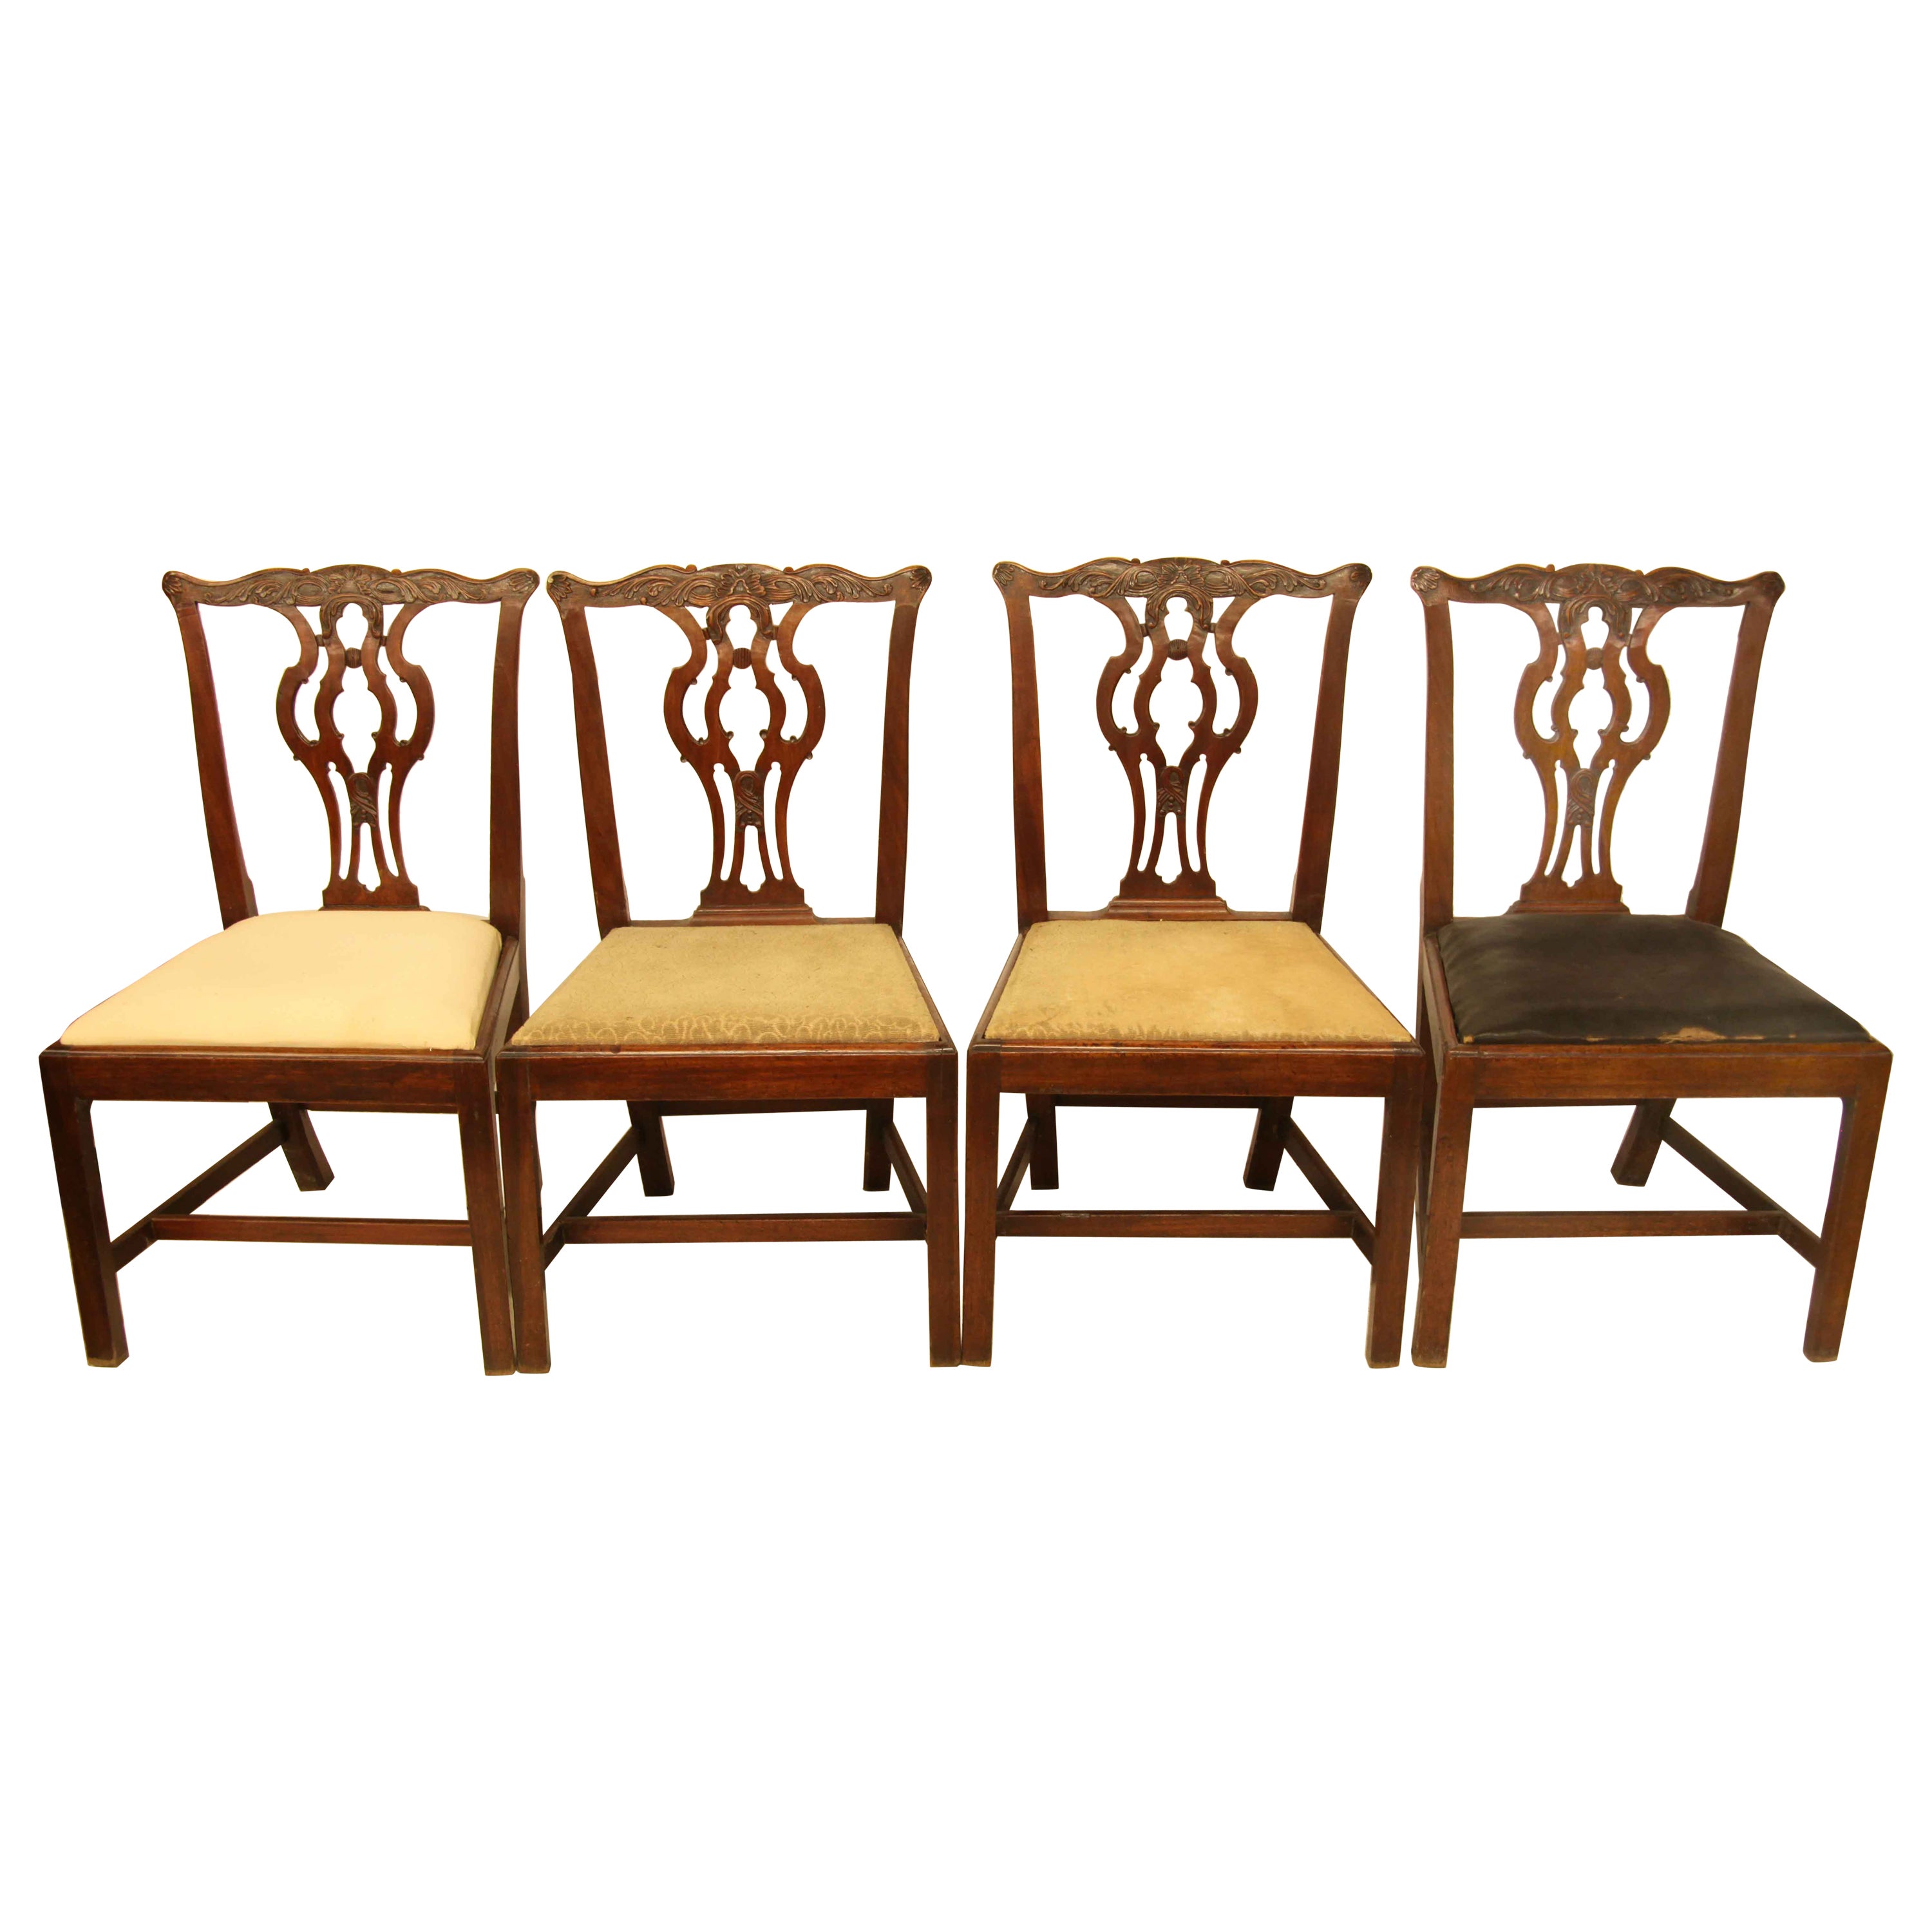 Set of Four 18th Century Chippendale Chairs